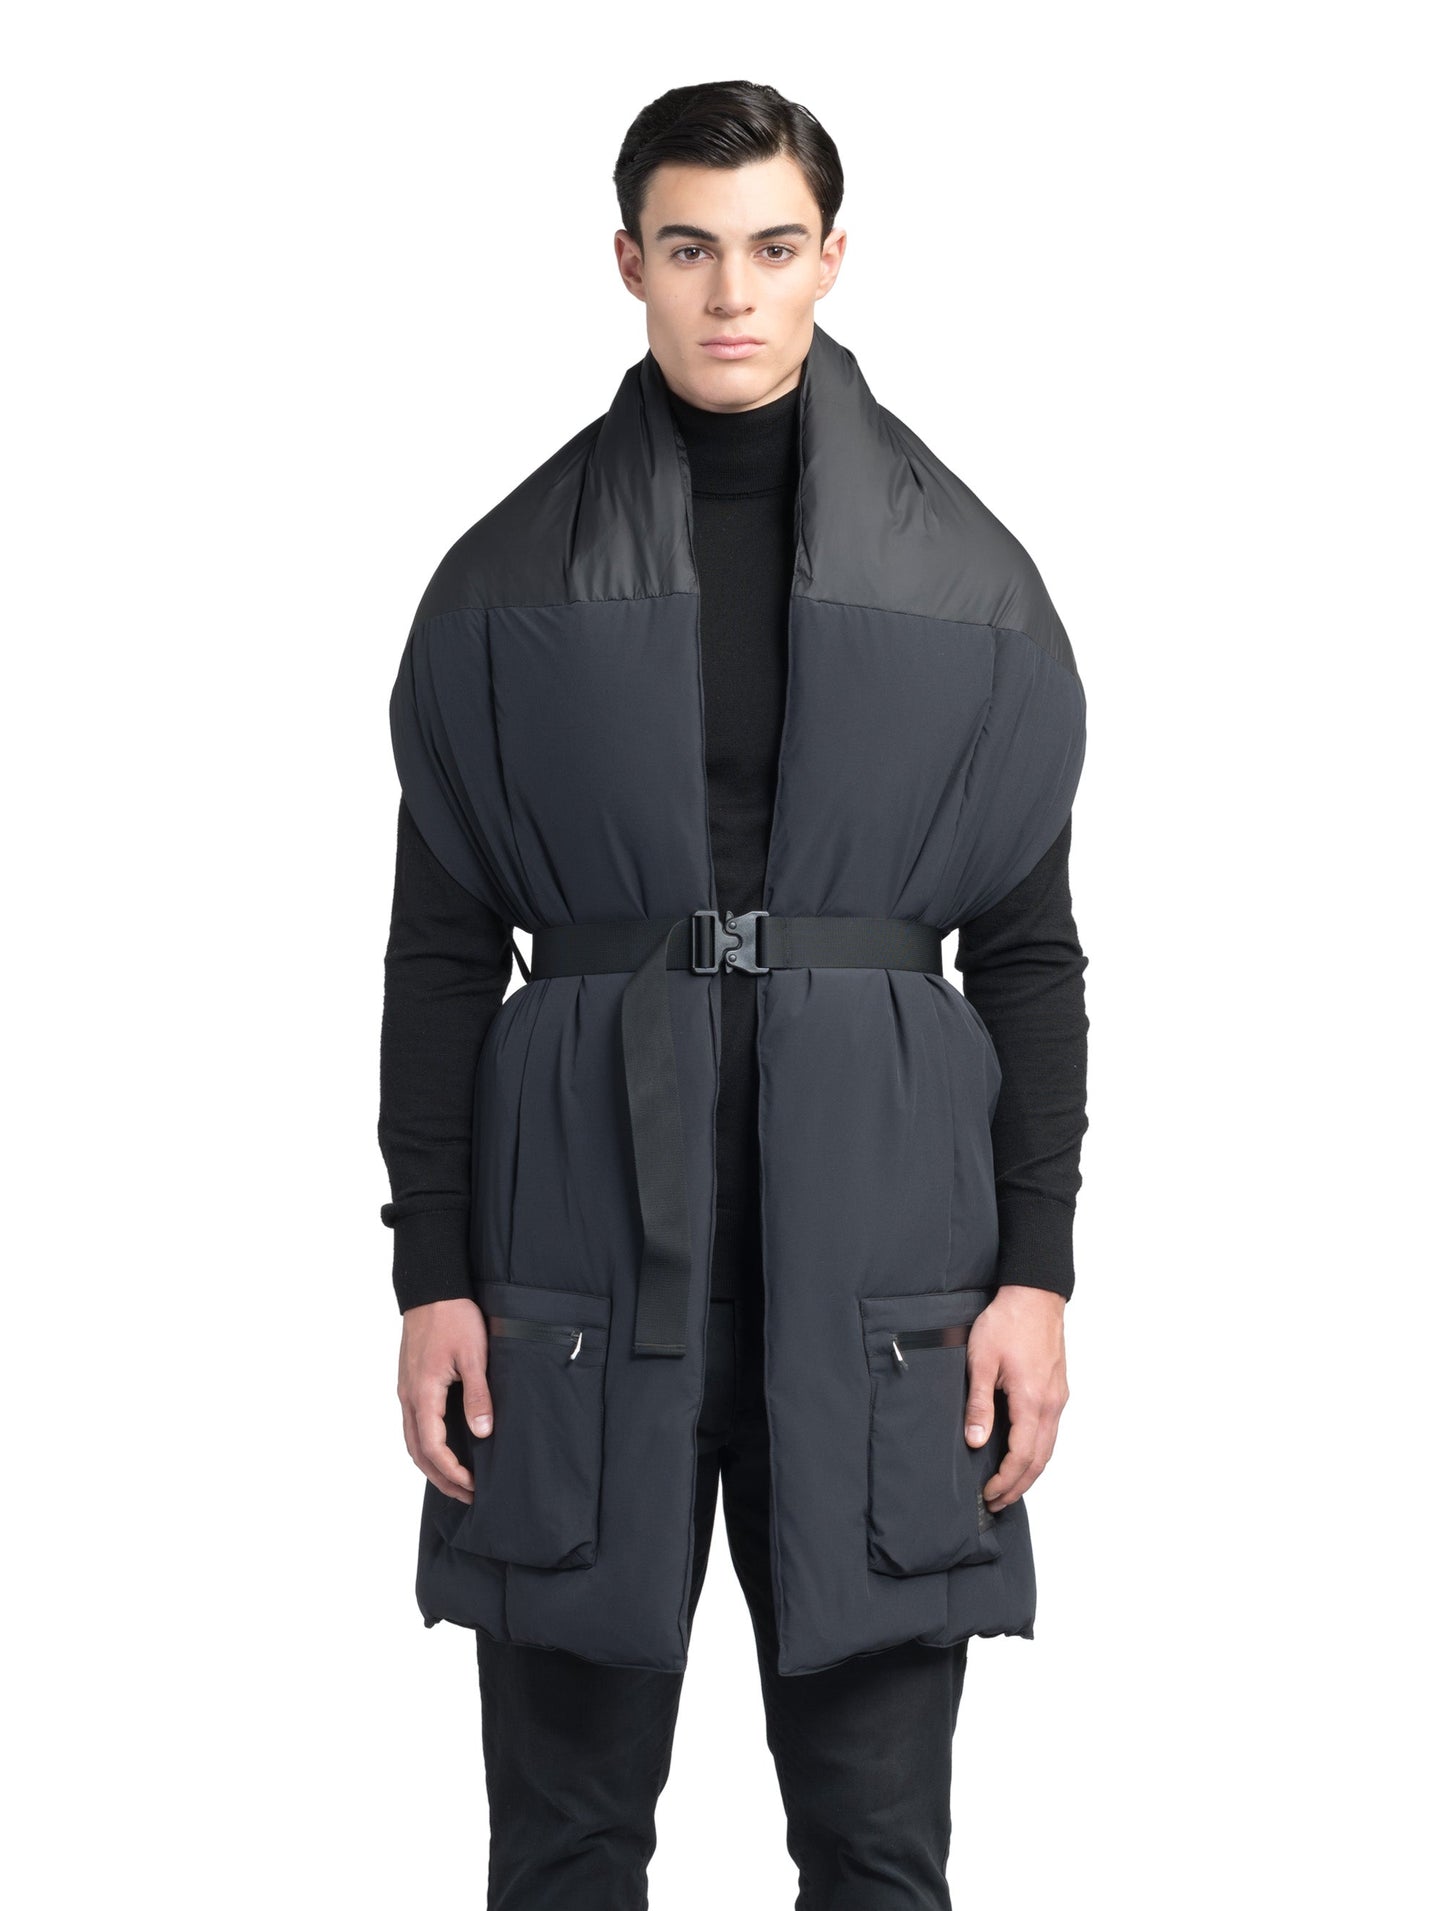 Chroma Unisex Oversized Puffer Scarf in stretch ripstop and taffeta nylon in a quilted pattern, Canadian White Duck Down insulation, cobra buckle belt with webbing strap, and large zipper pocket at scarf end, in Black